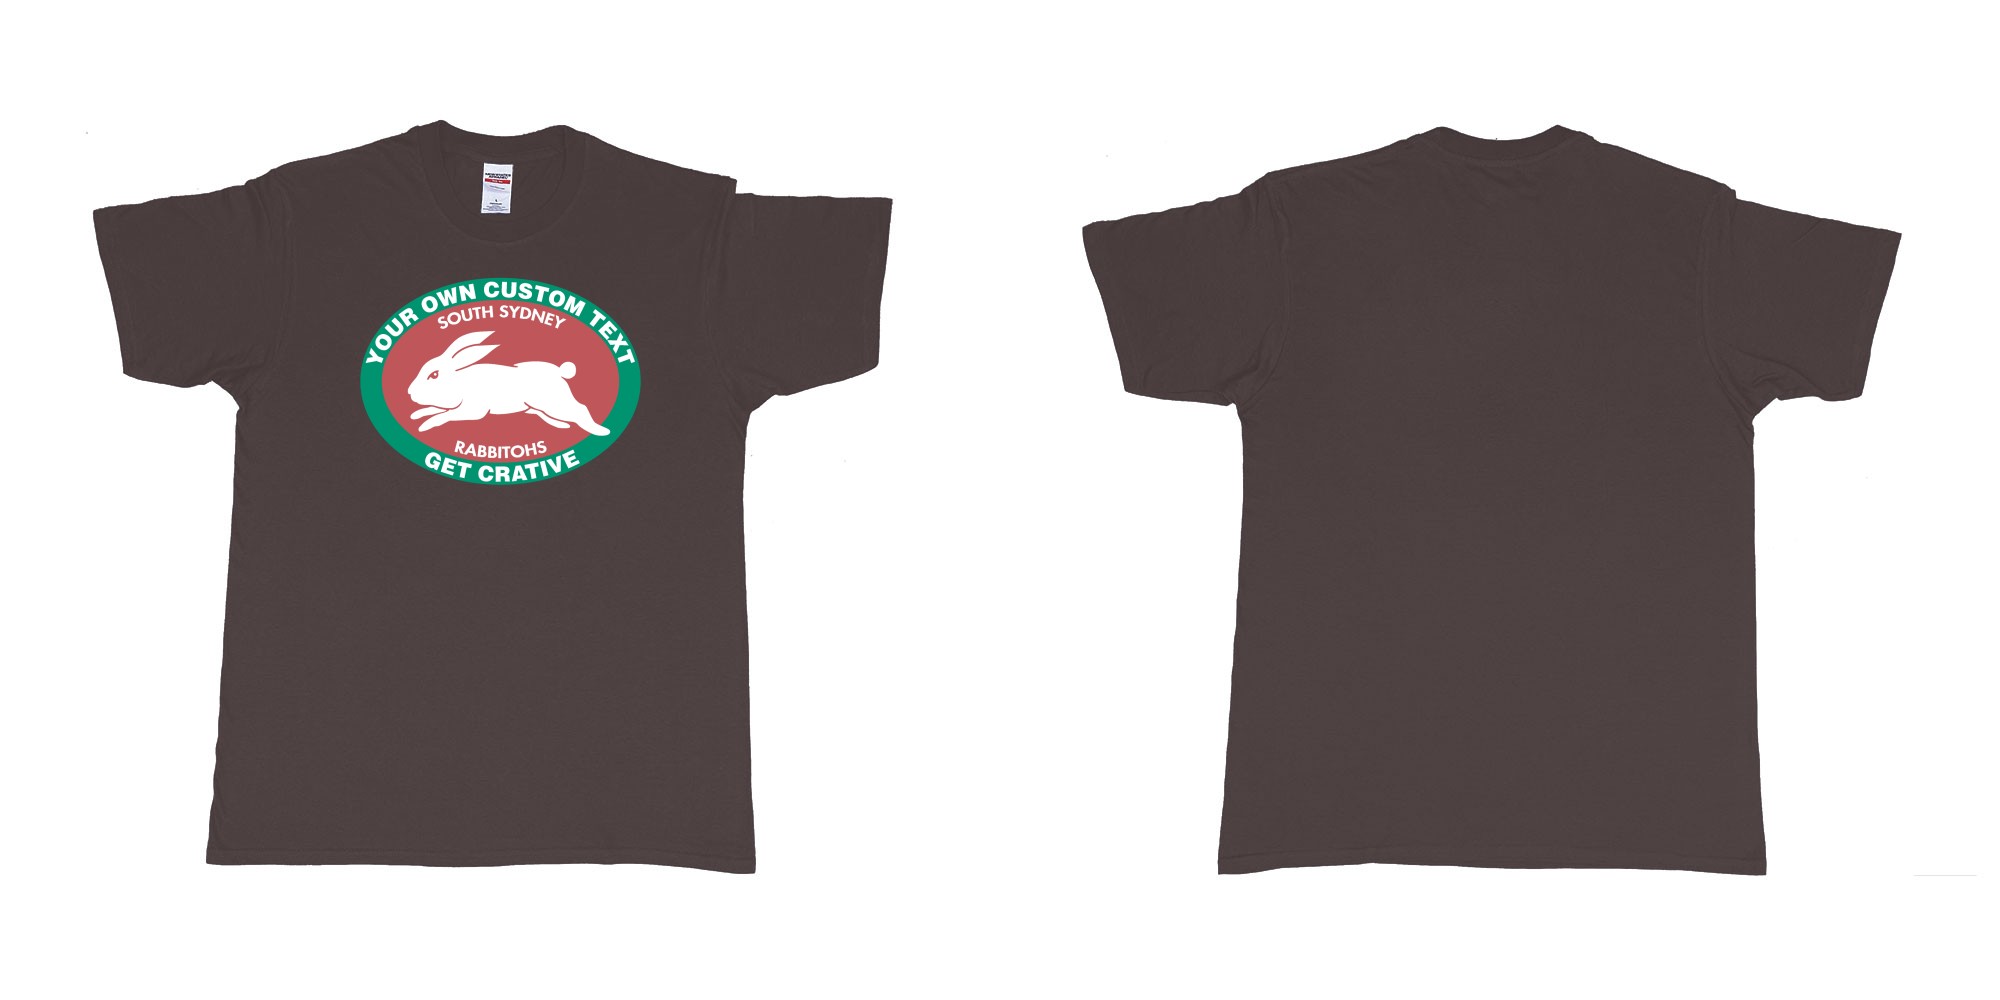 Custom tshirt design south sydney rabbitohs nrl custom print in fabric color dark-chocolate choice your own text made in Bali by The Pirate Way